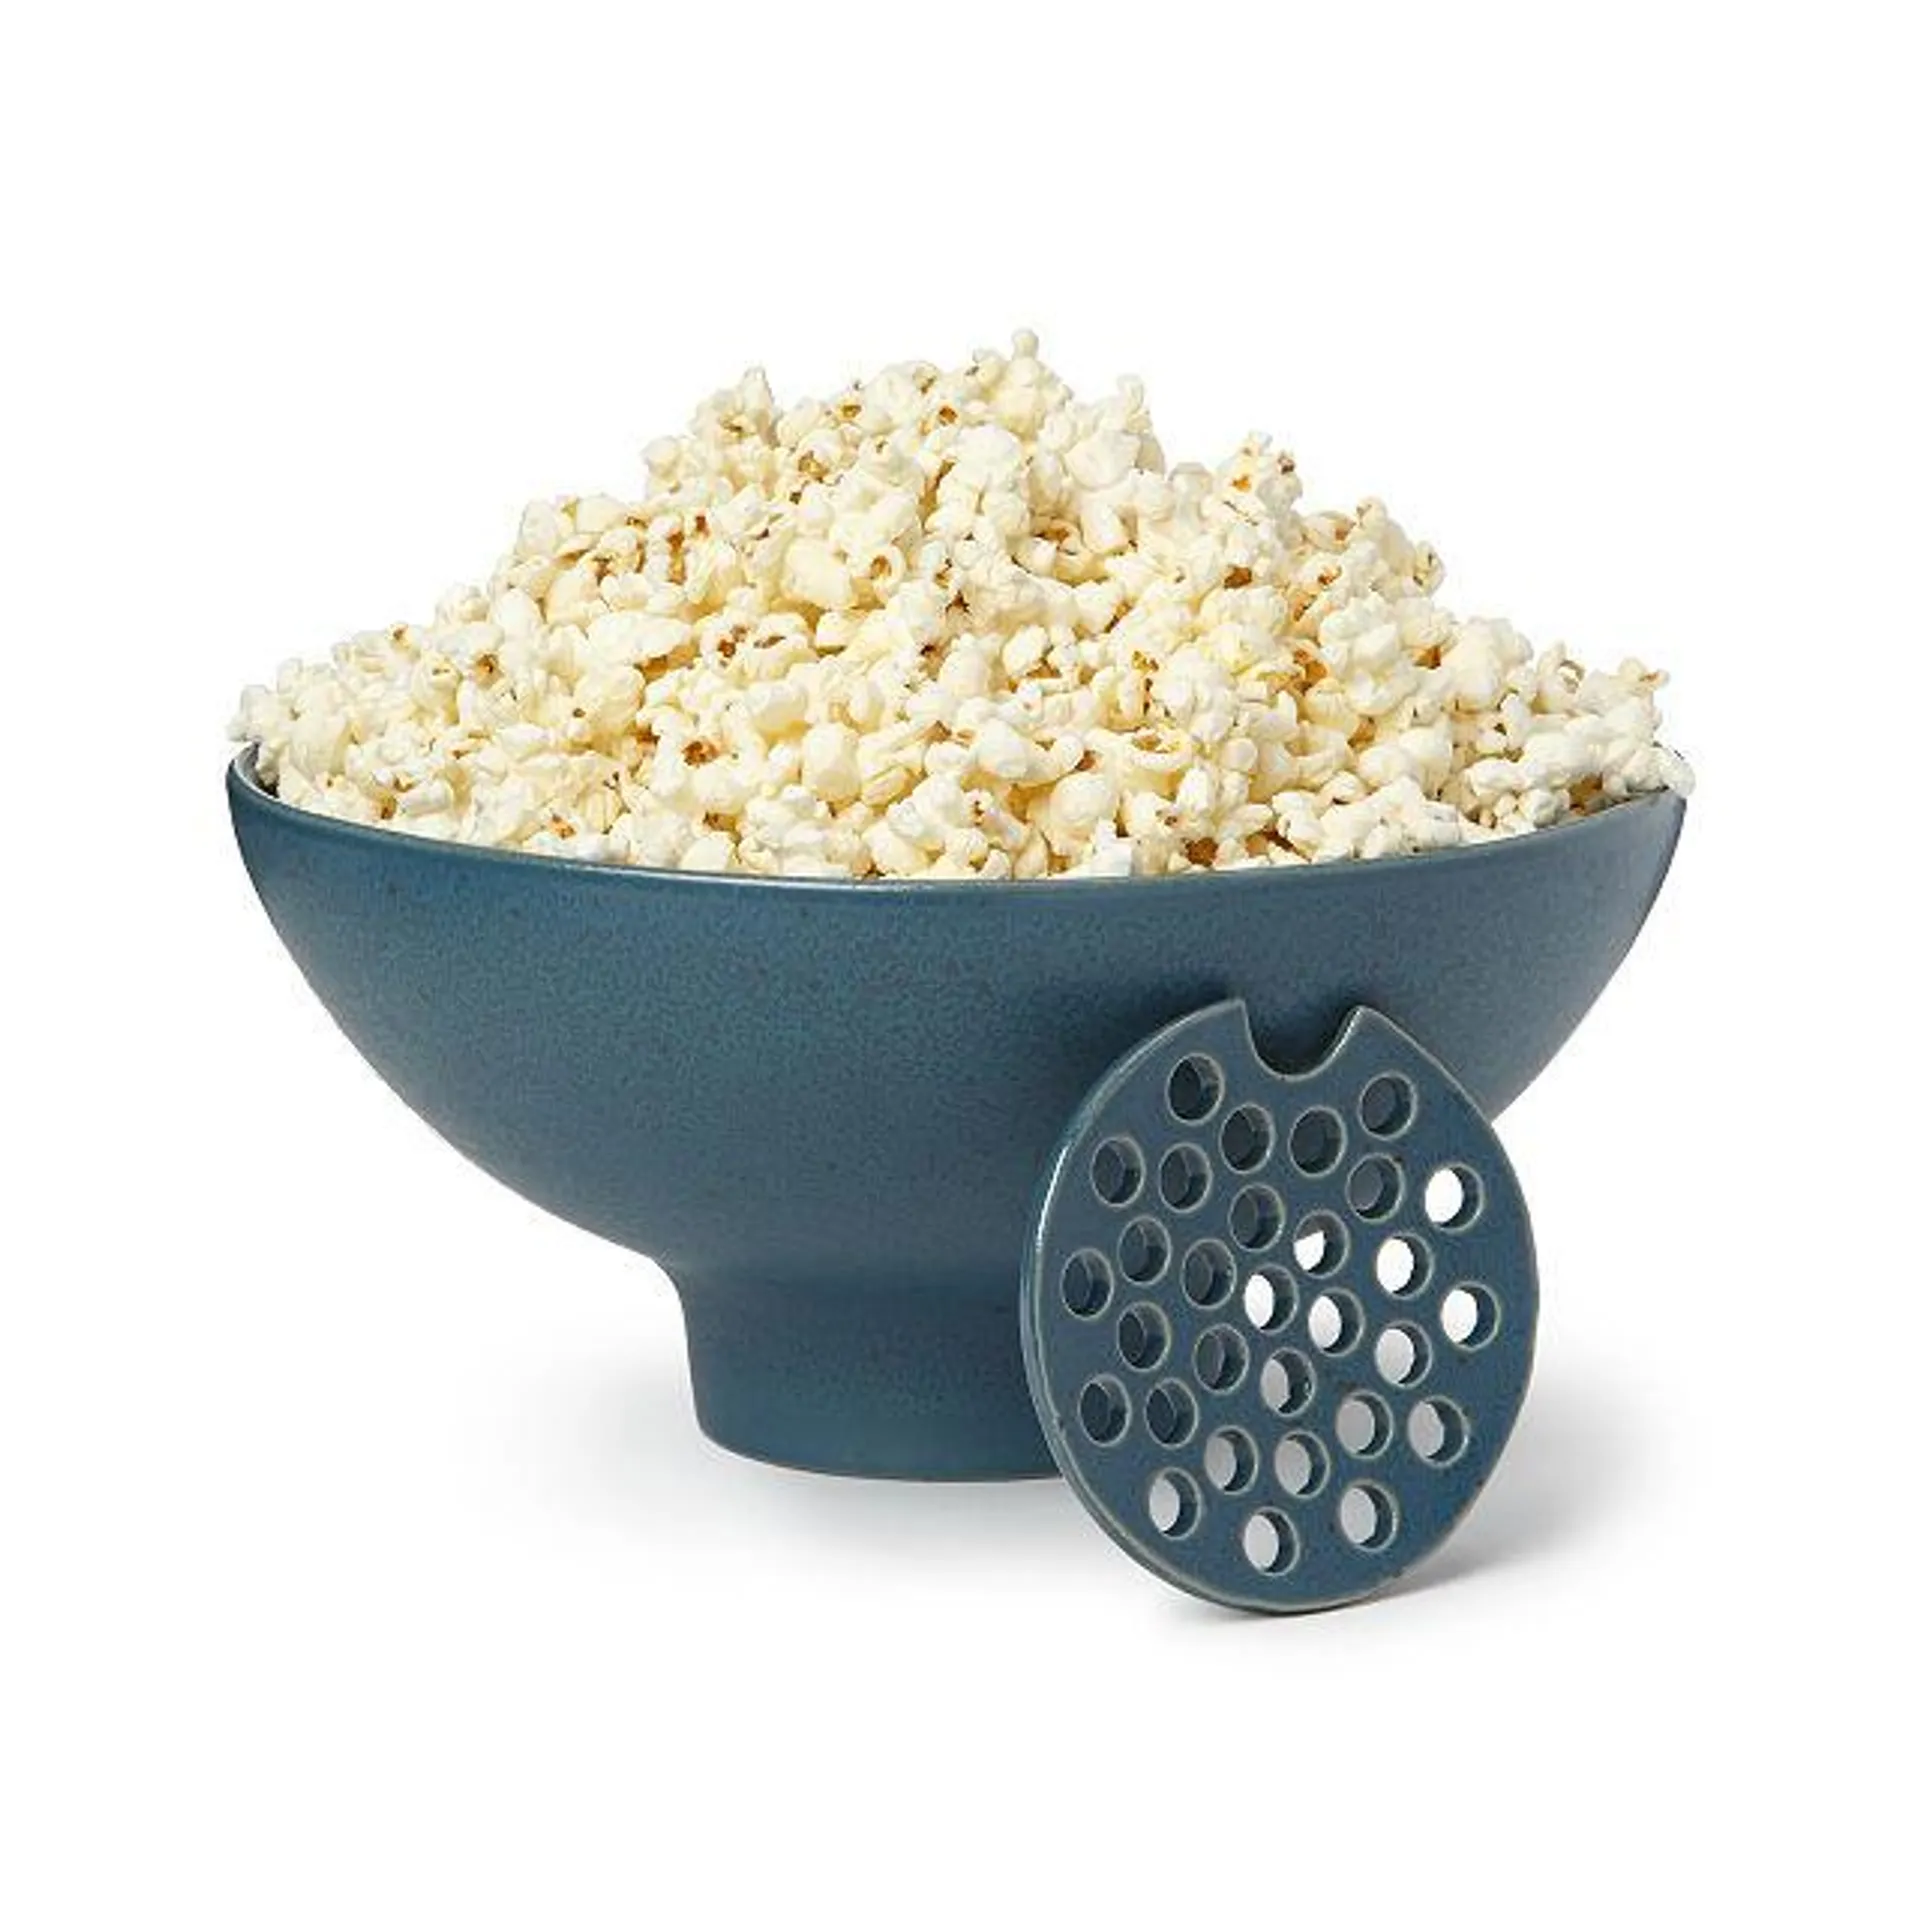 The Popcorn Bowl with Kernel Sifter